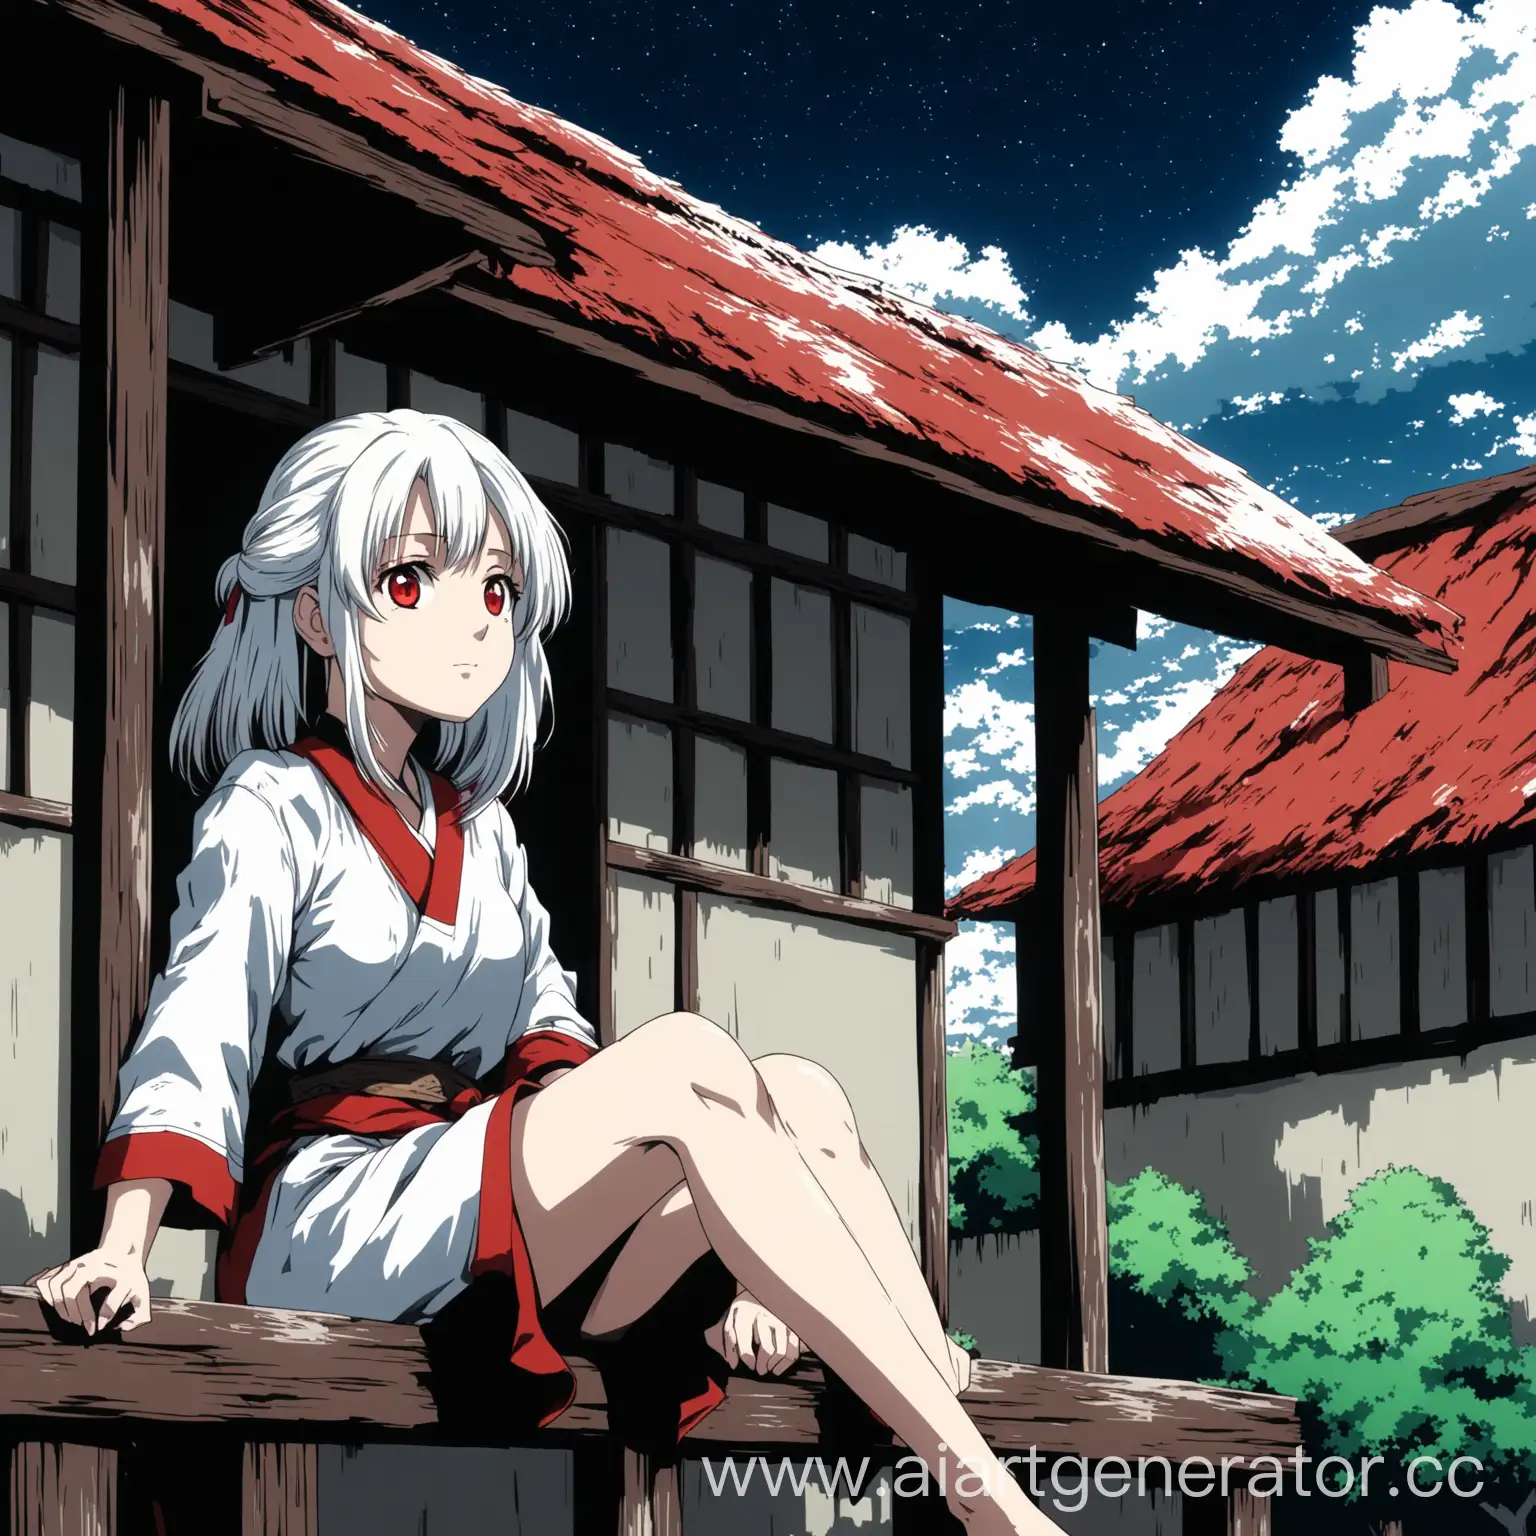 Anime-Style-Beautiful-Girl-with-White-Hair-and-Red-Eyes-Sitting-on-Porch-of-Old-House